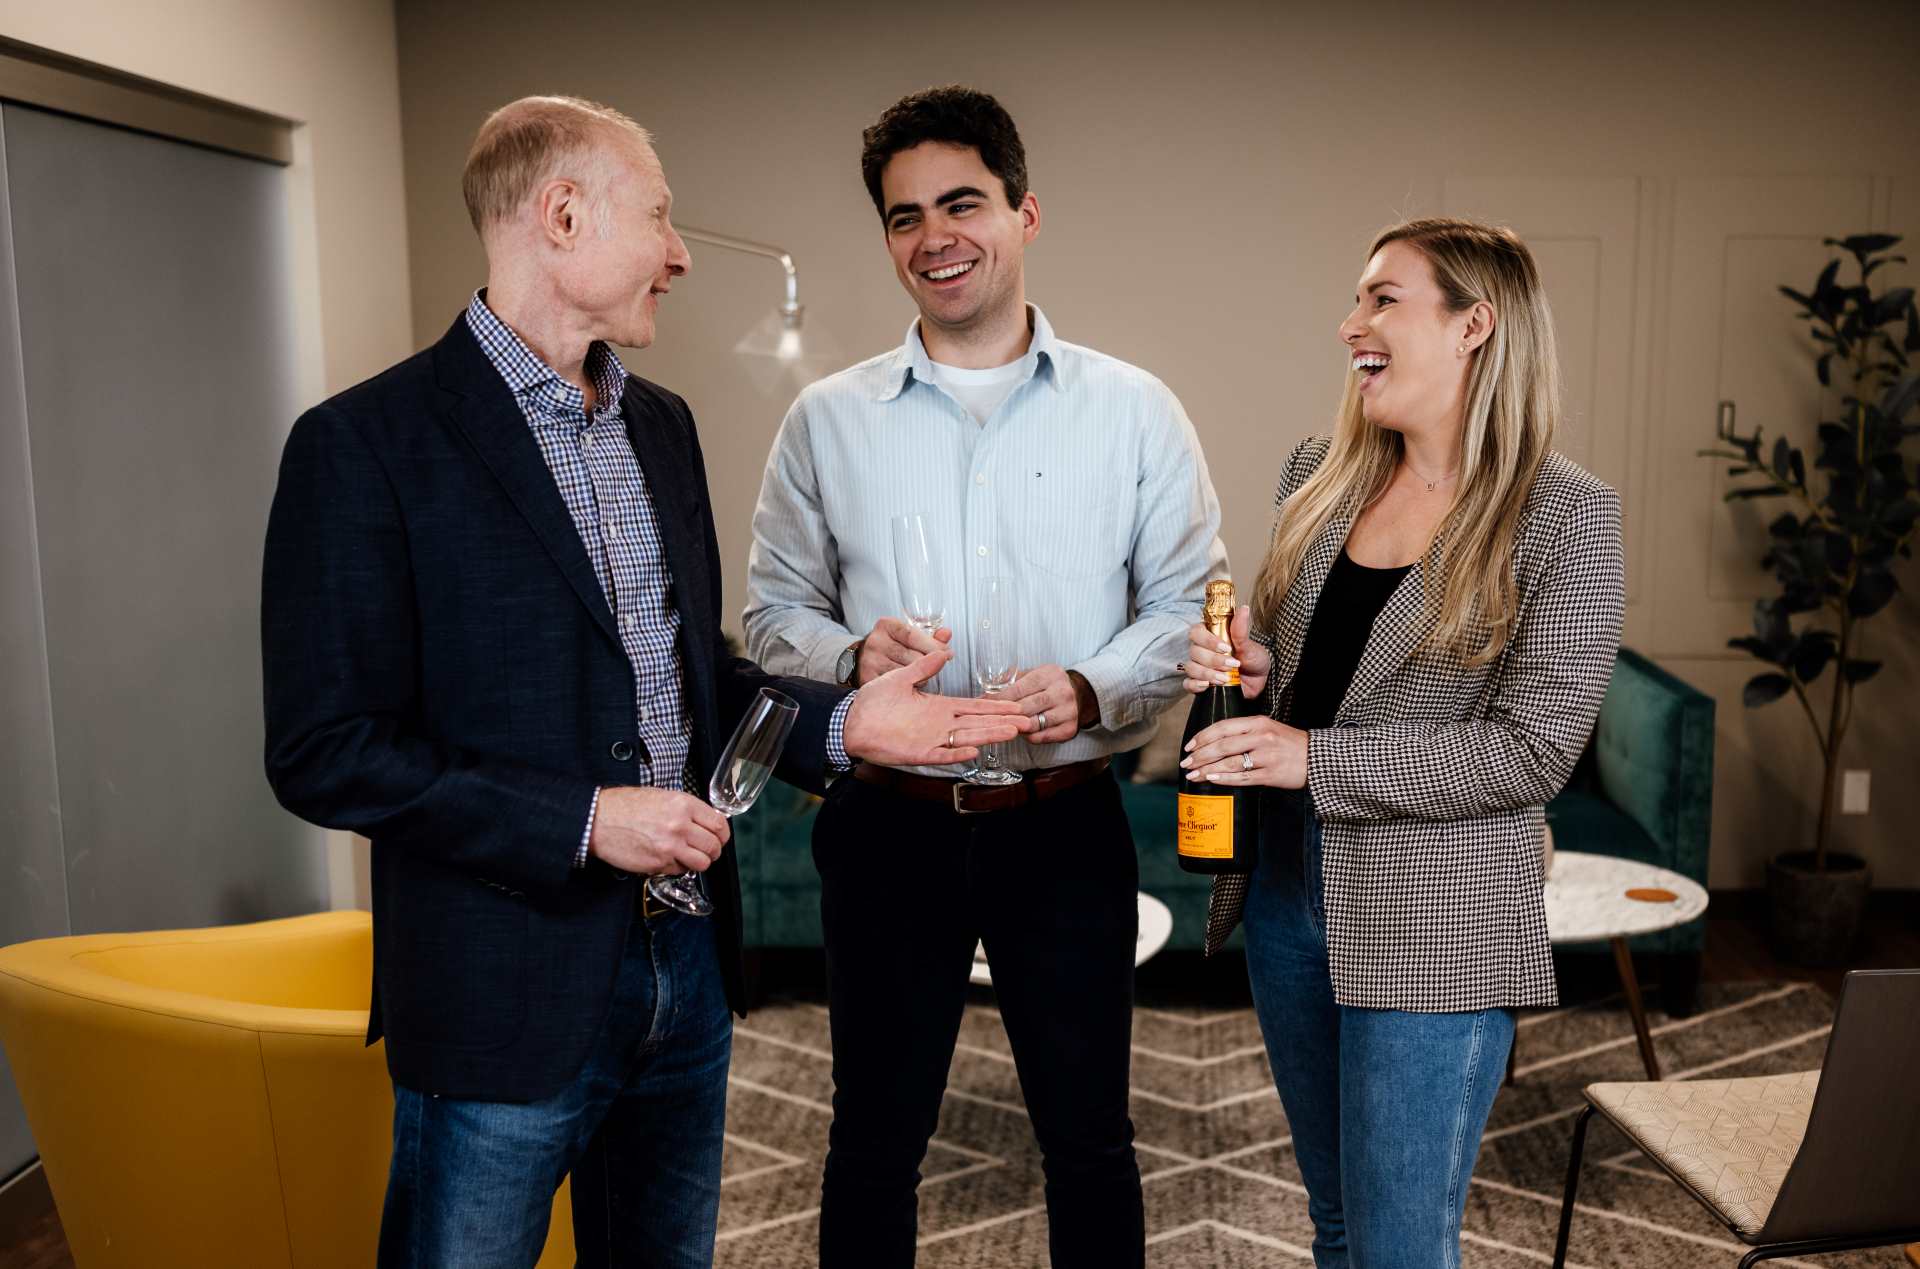 Three founders of a digital marketing agency celebrating over champagne